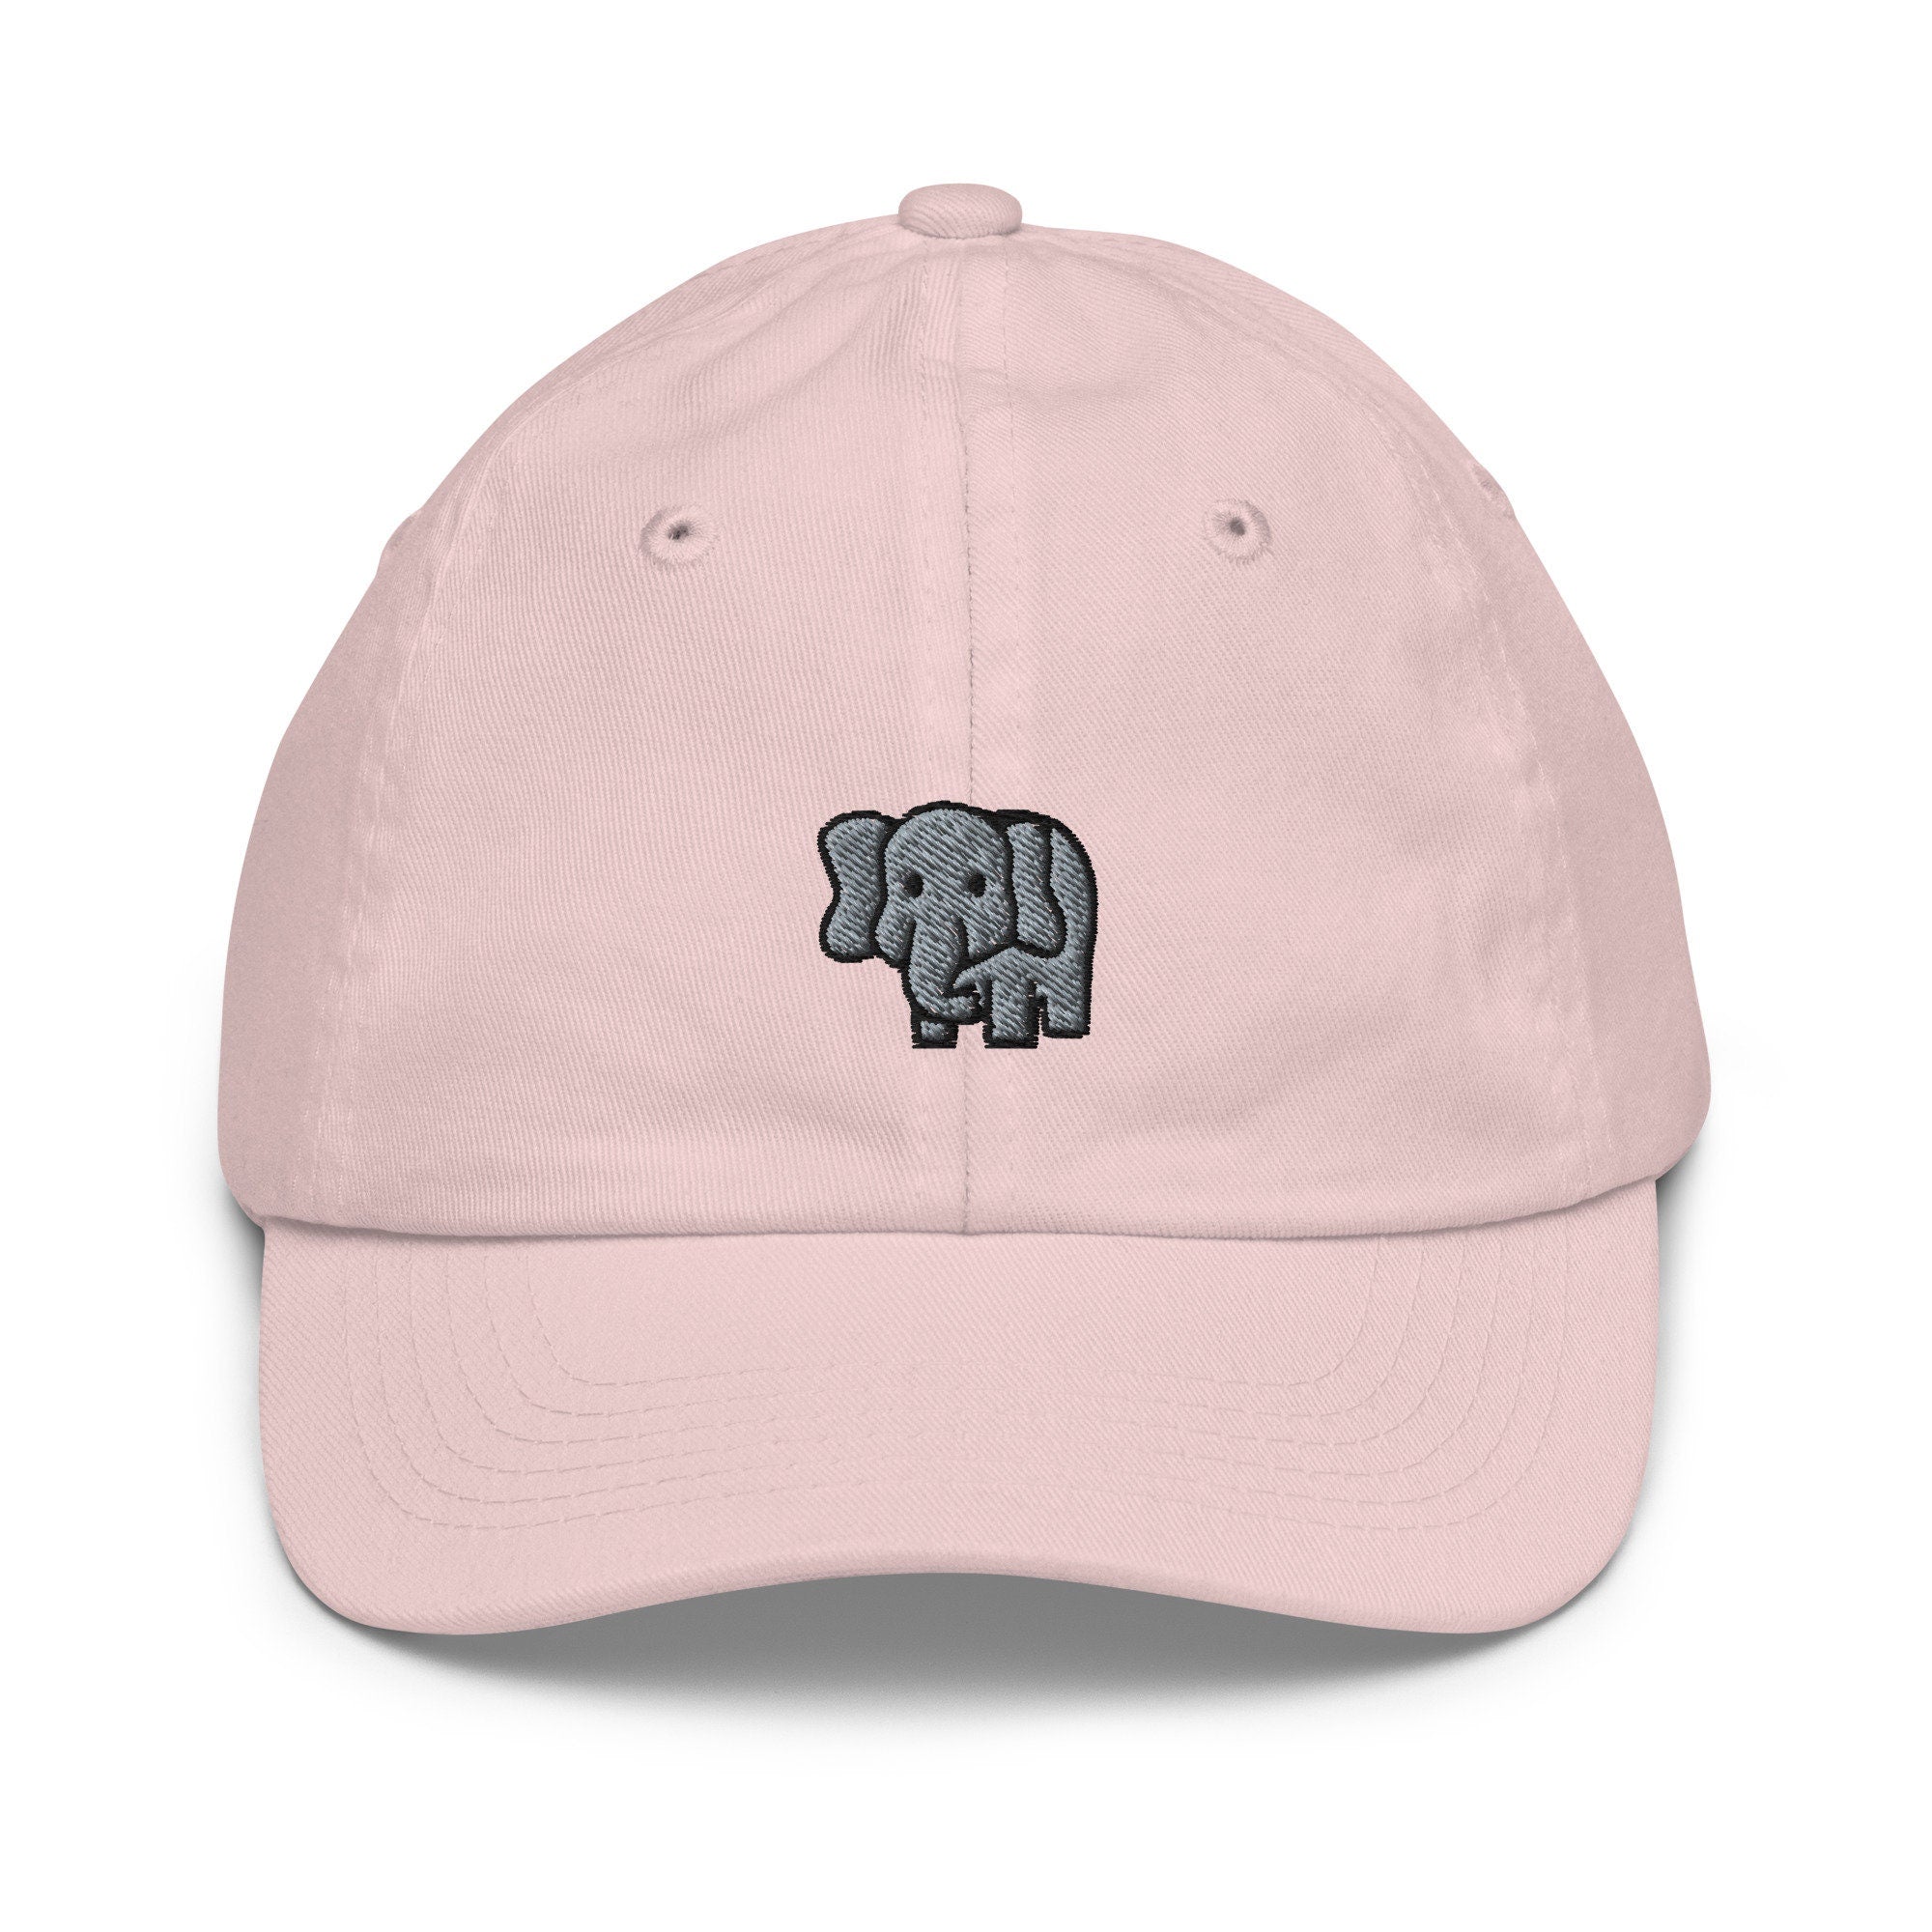 Elephant Youth Baseball Cap, Handmade Kids Hat, Embroidered Childrens Hat Gift - Multiple Colors